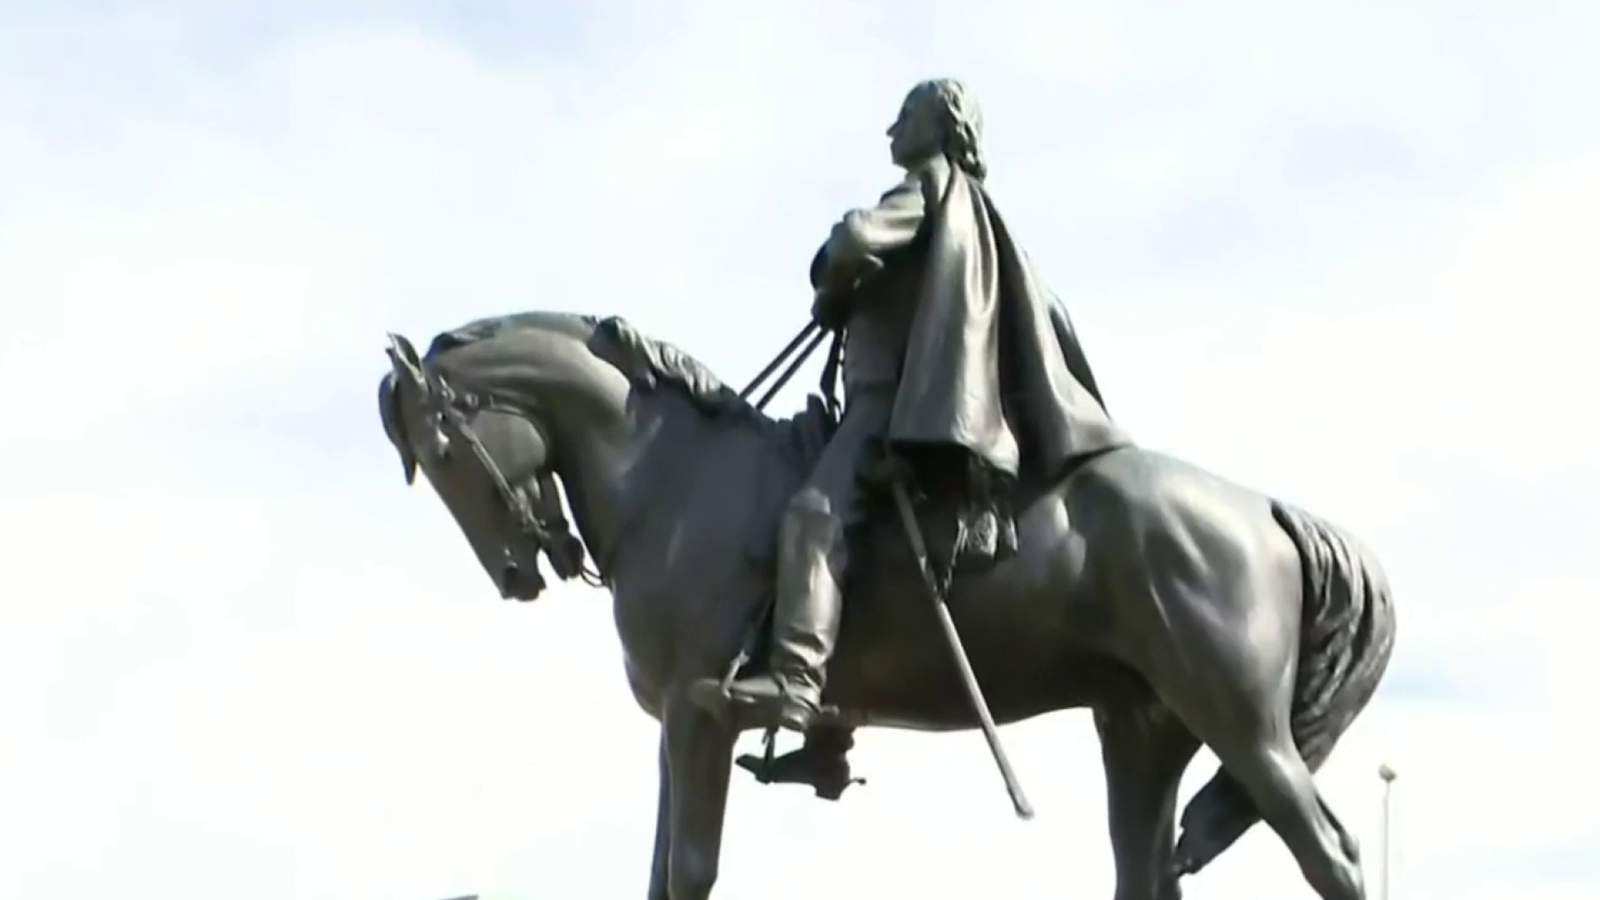 Petition started to remove Monroe statue of General Custer